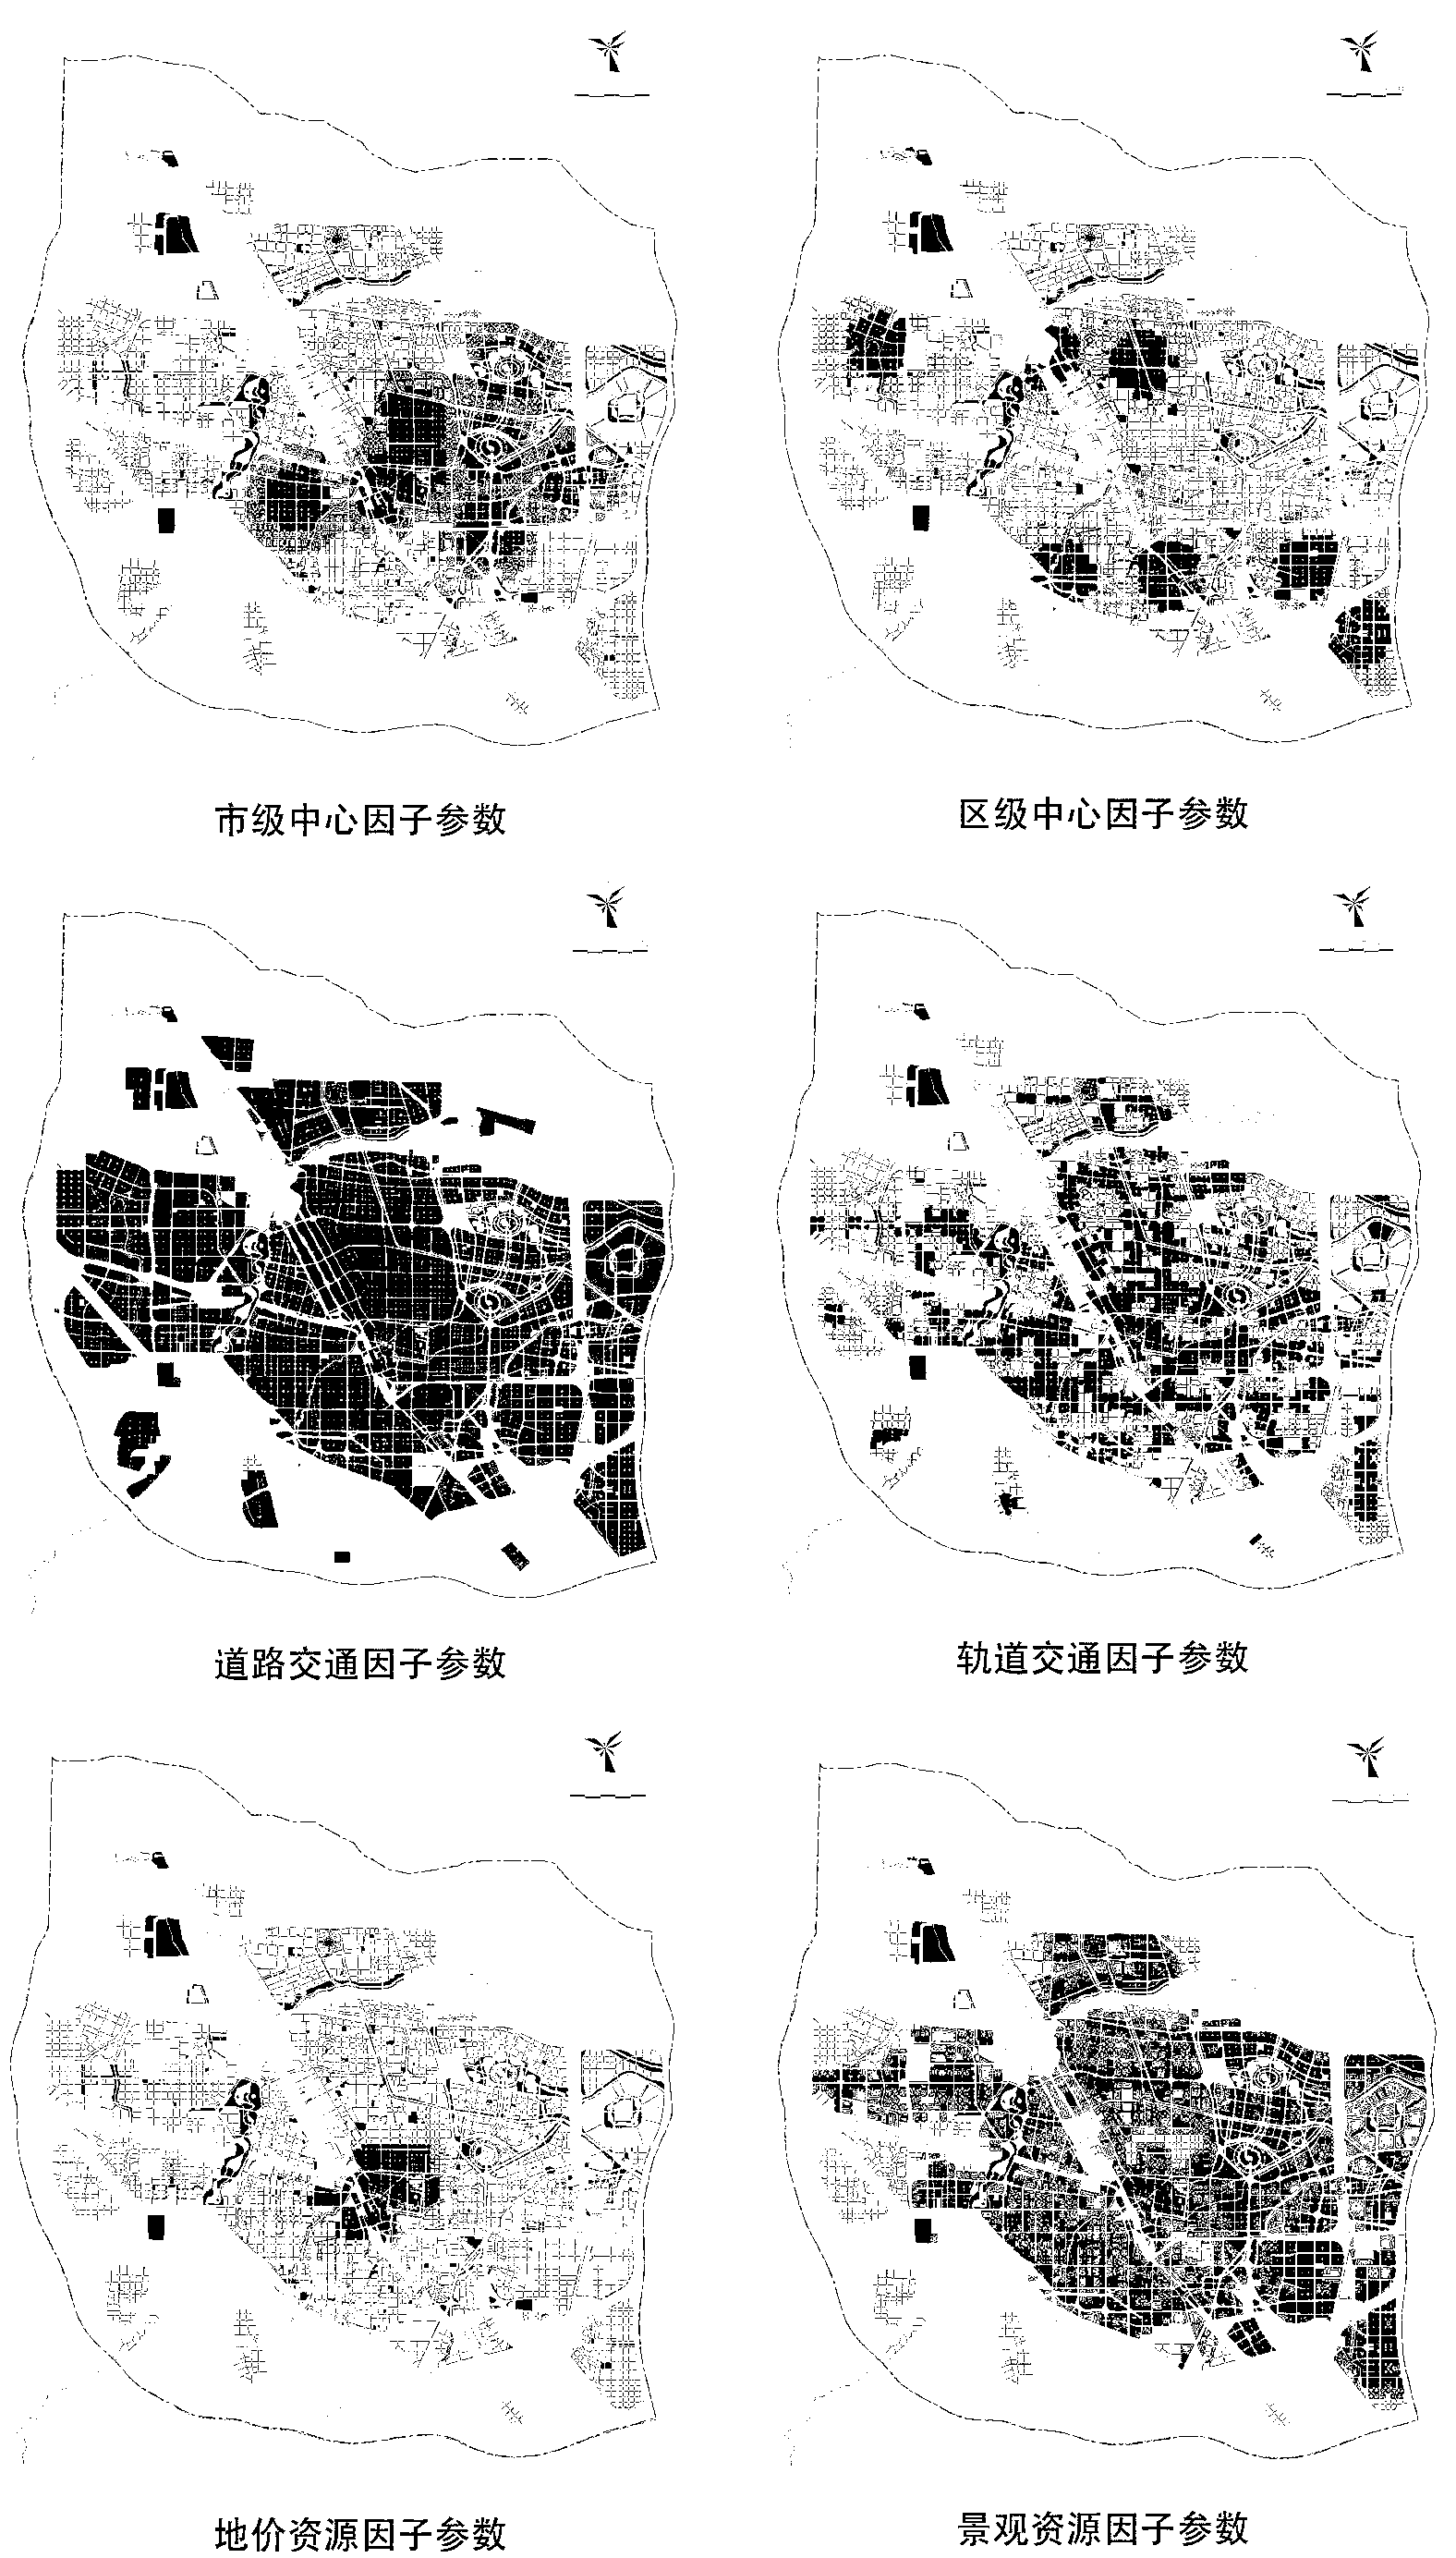 Overall city height control partition method based on comprehensive divisor evaluation